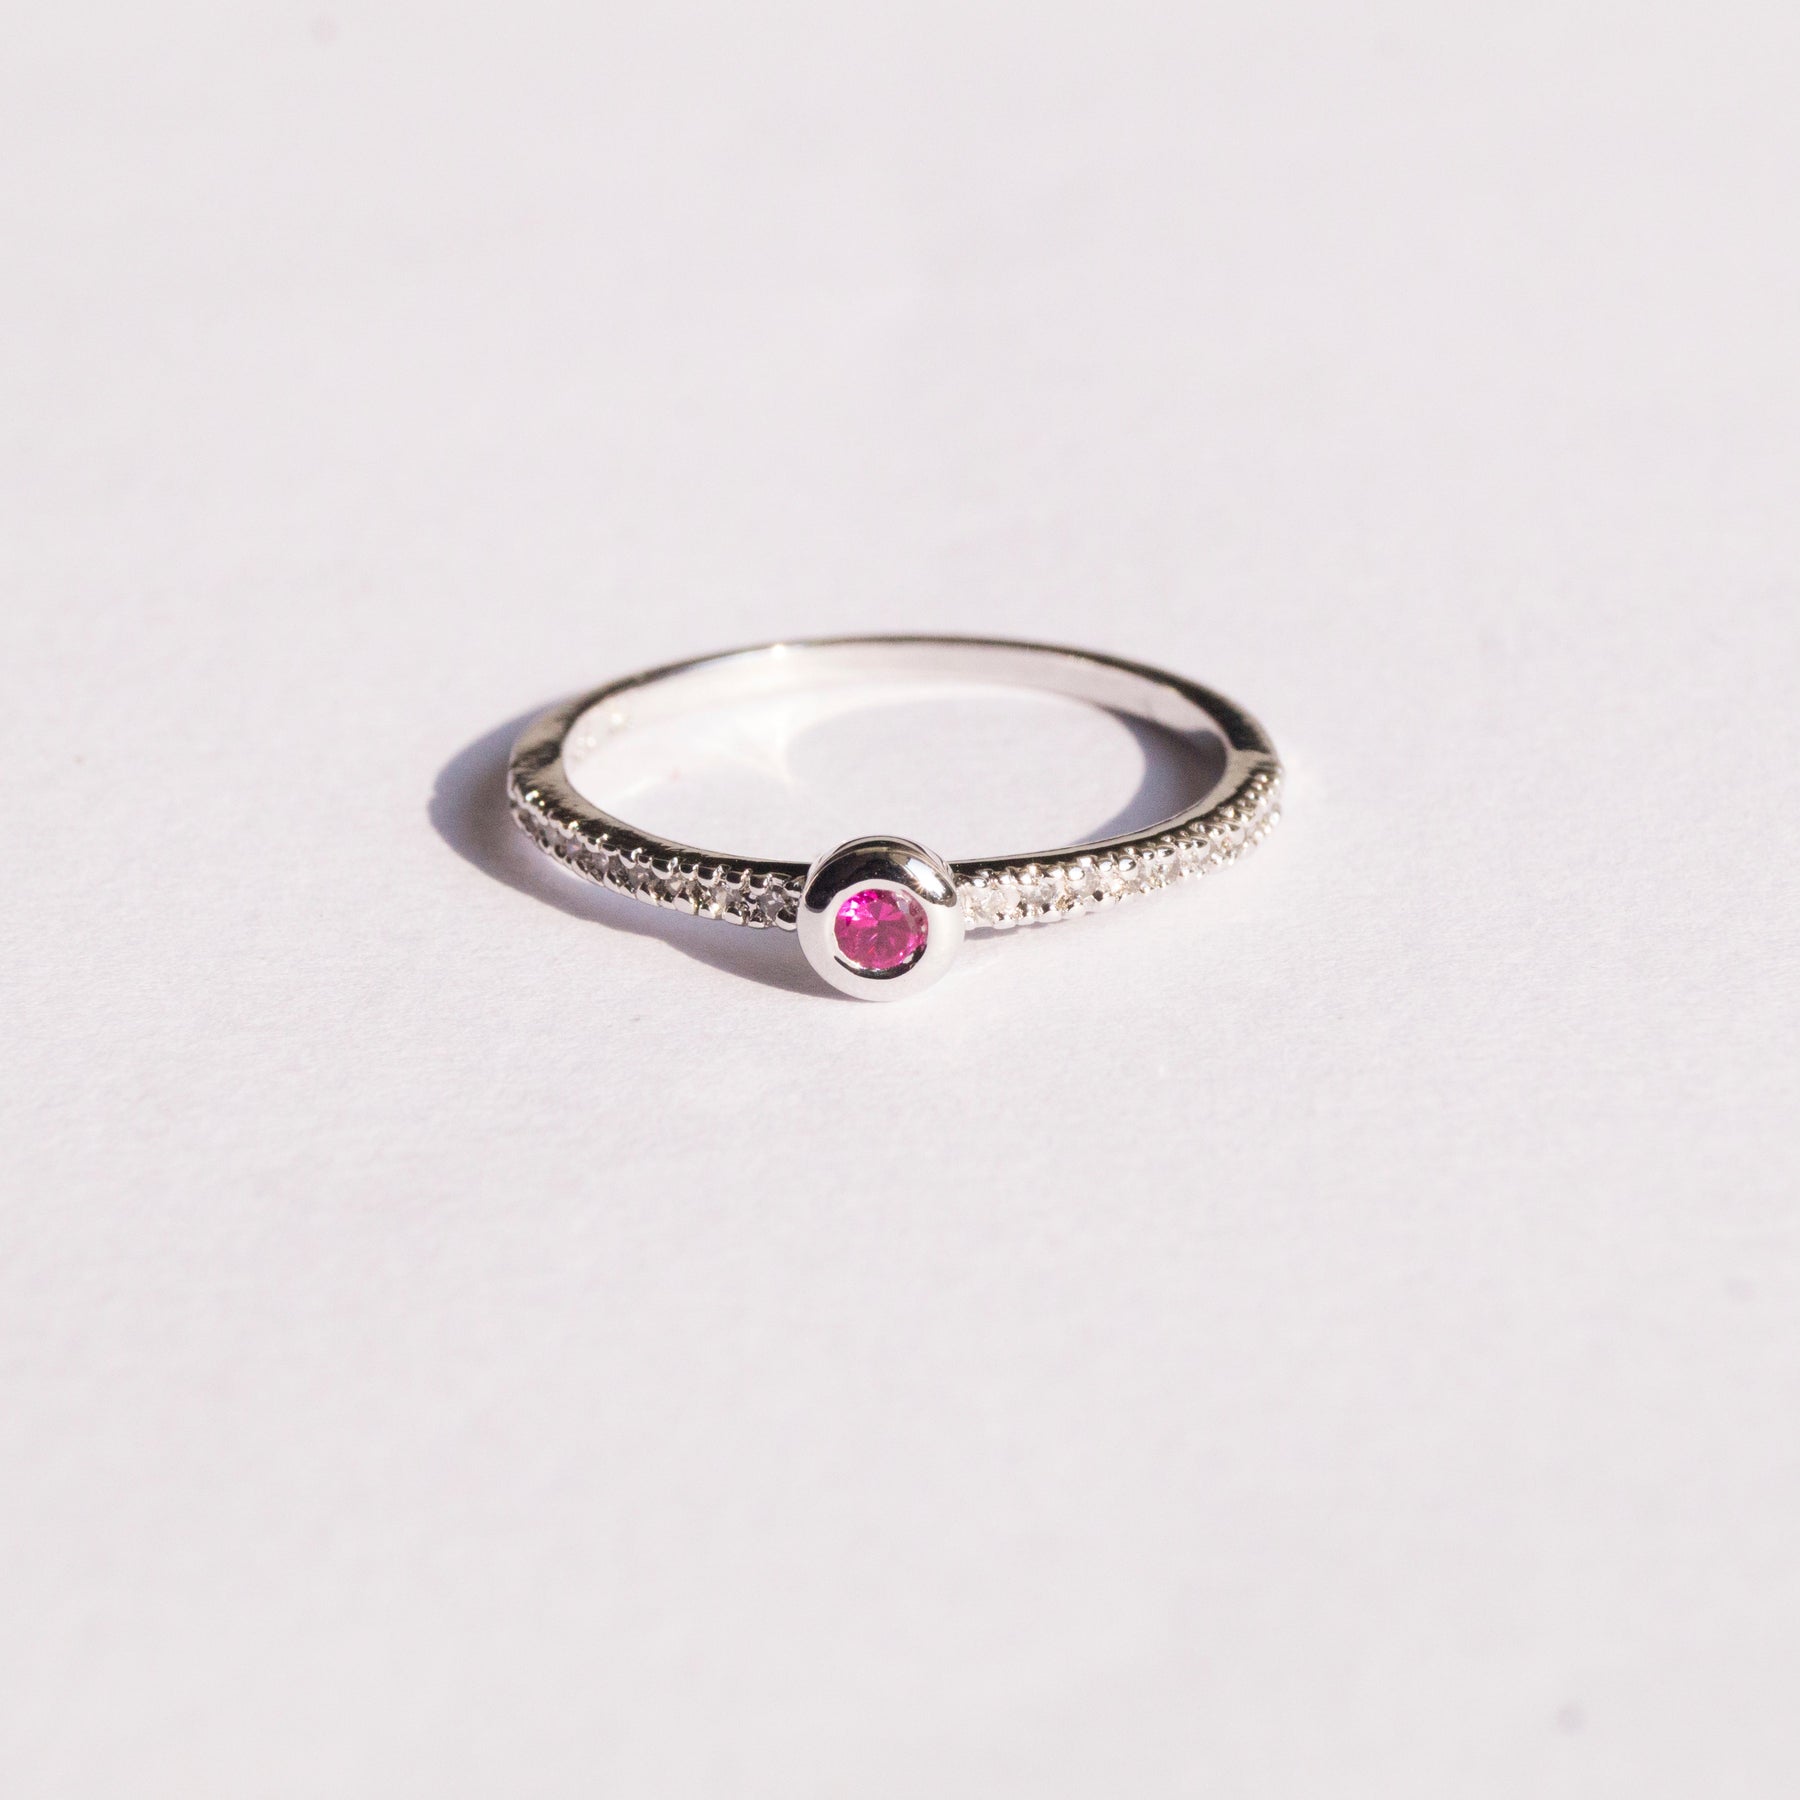 The Classic CZ Ring